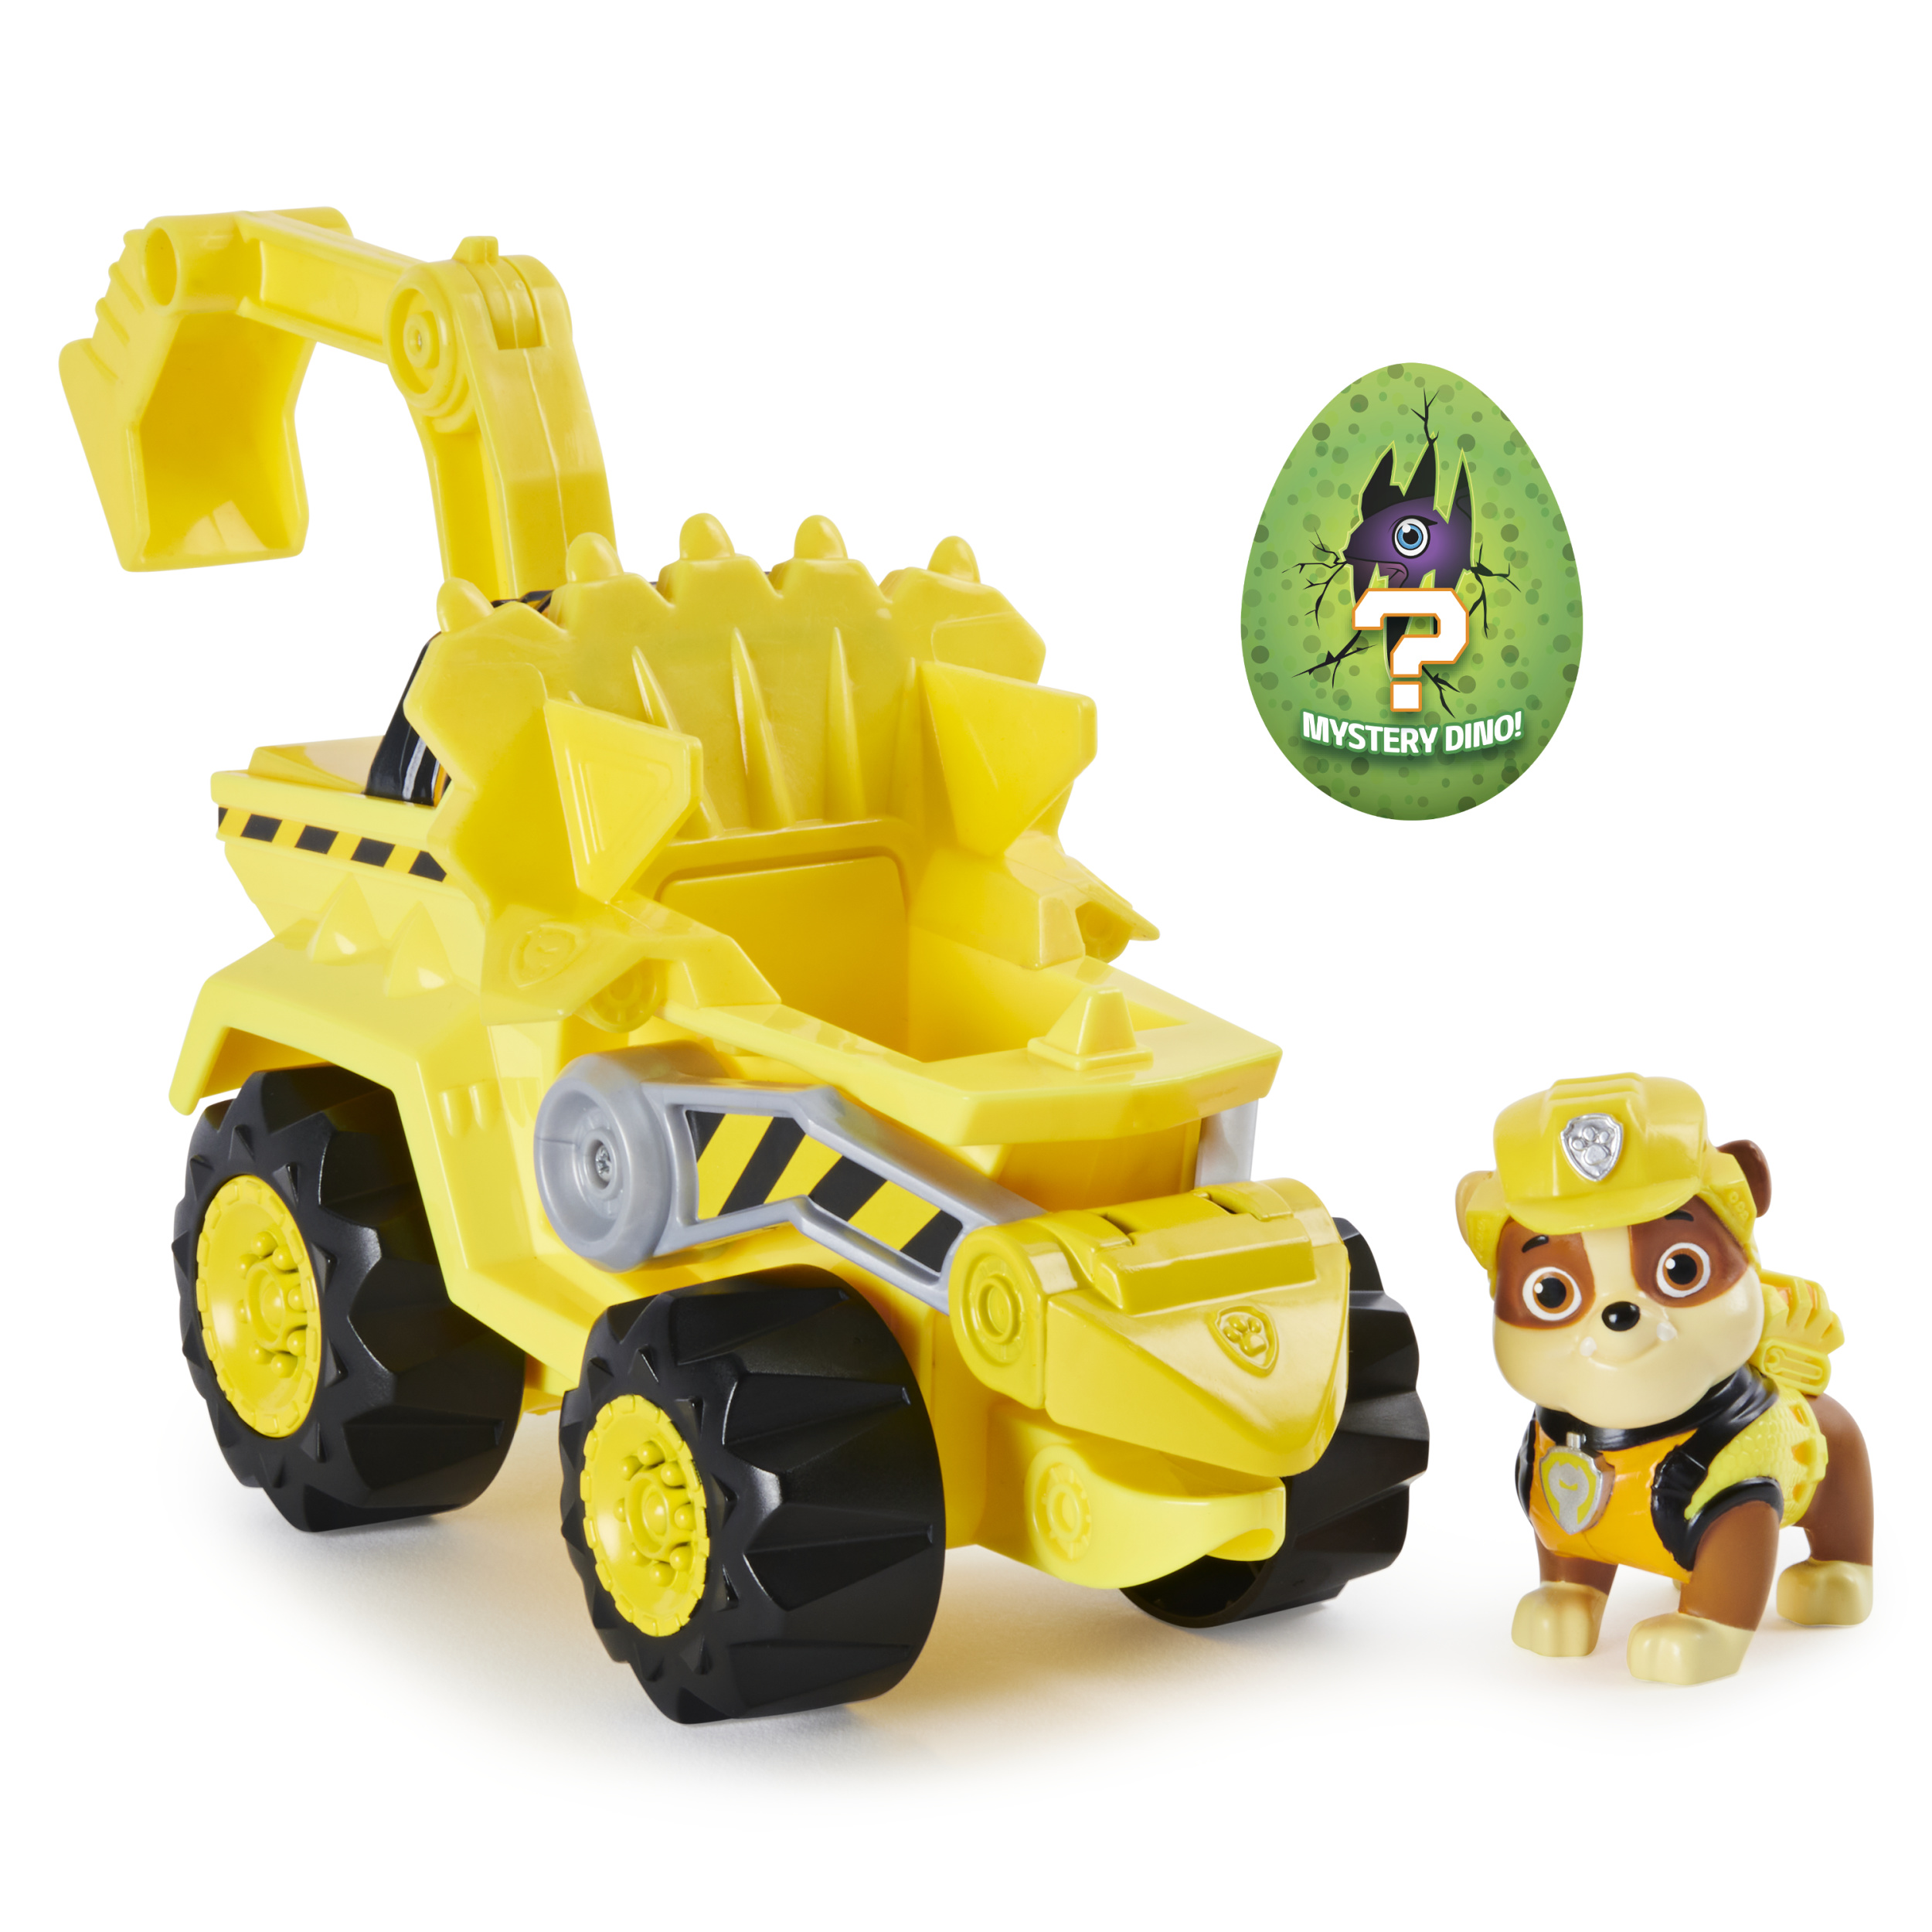 Paw Patrol Deluxe Dino Vehicles Assortment (Styles May Vary) - image 1 of 6